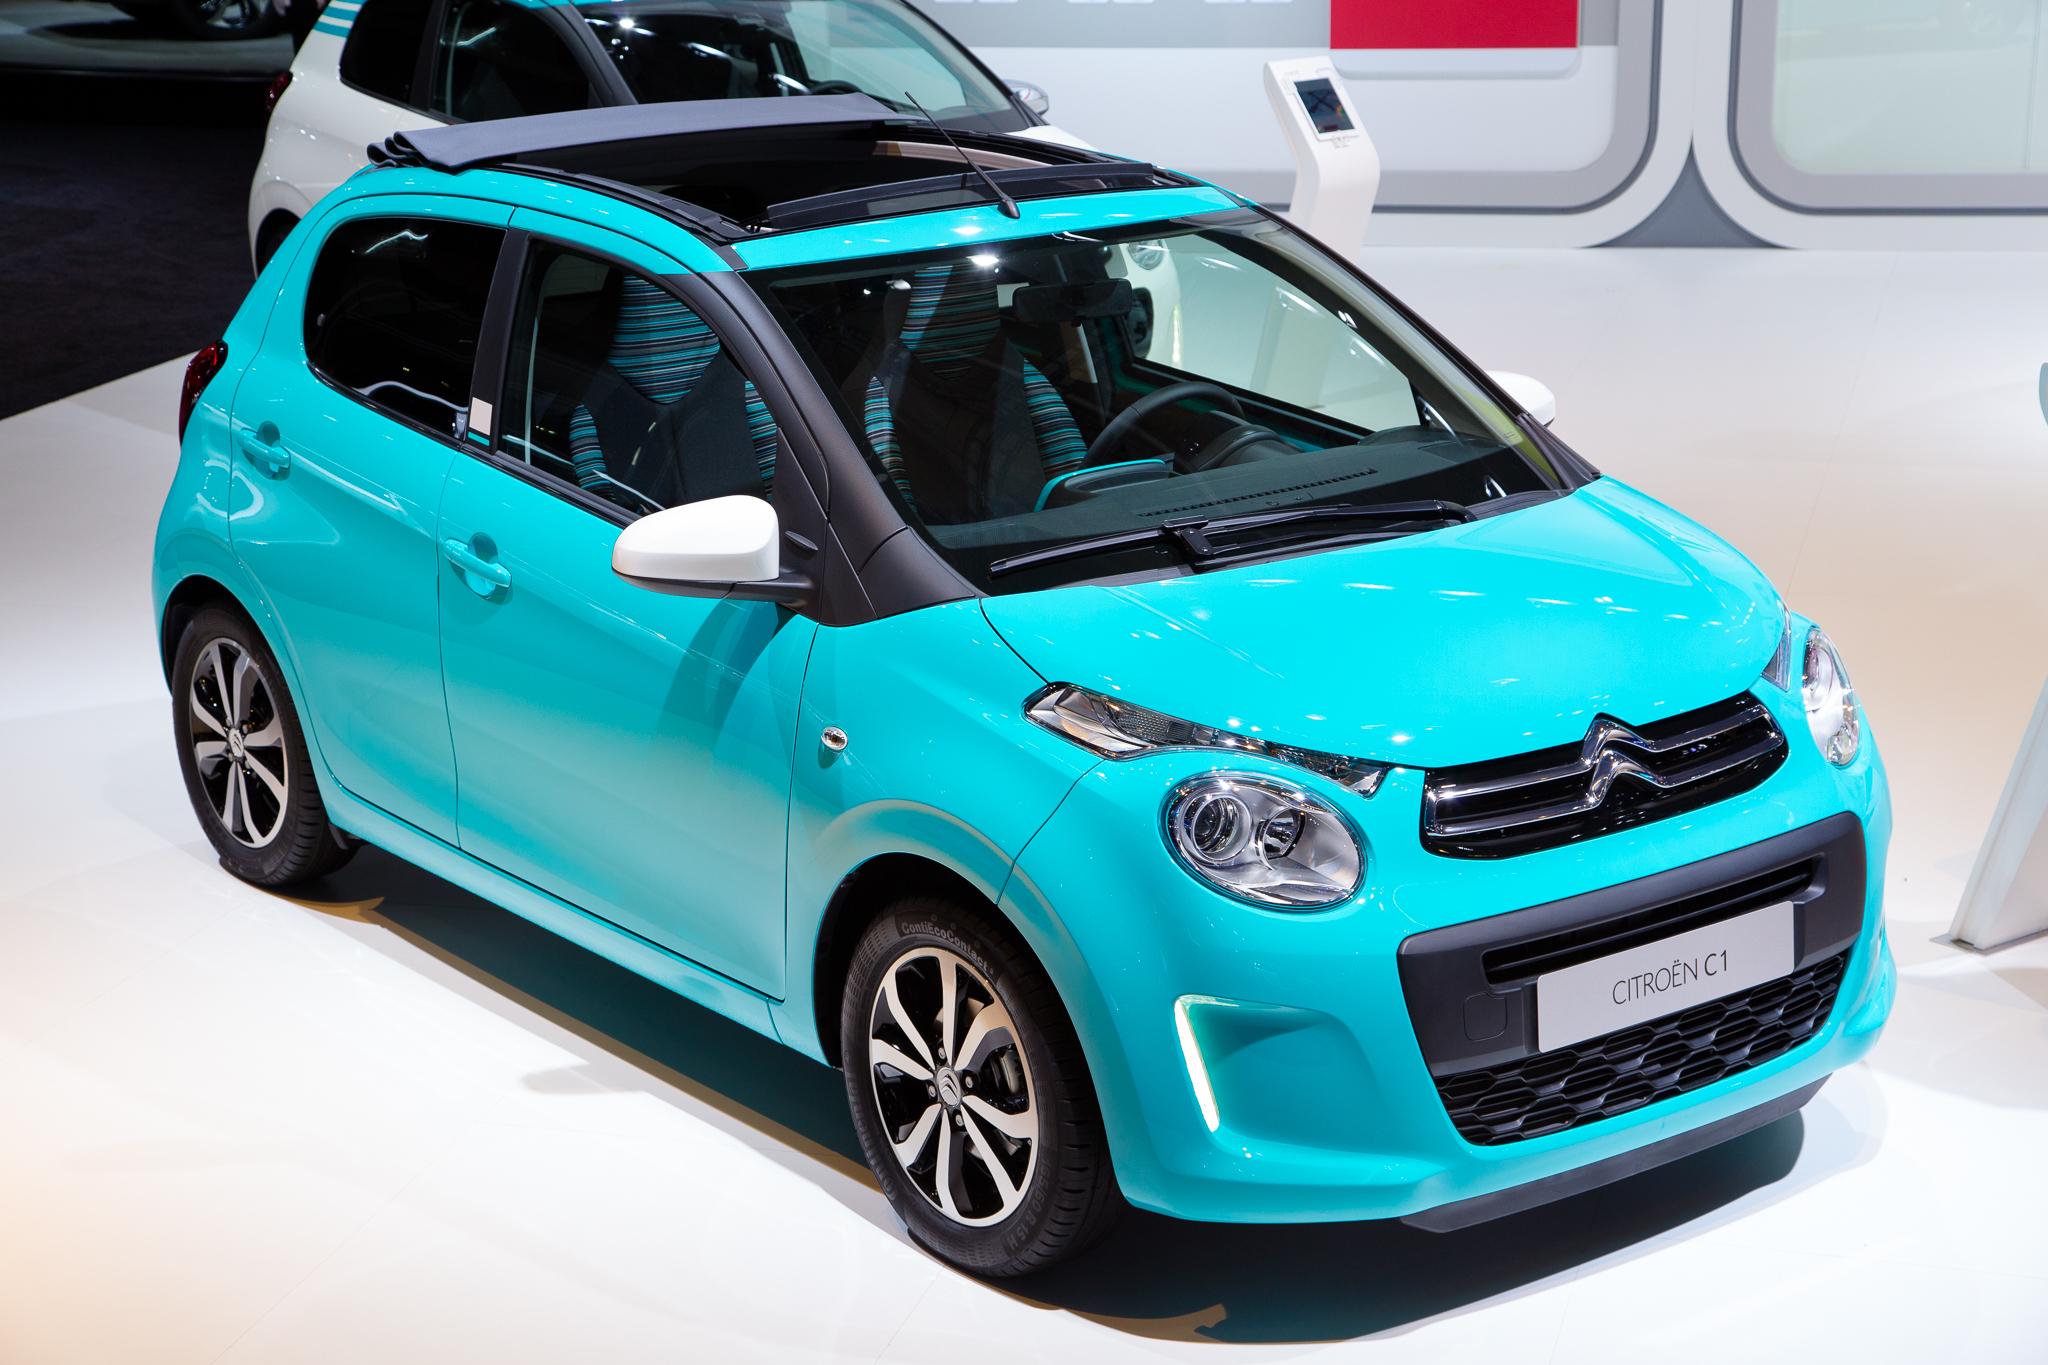 Bewust Oxideren Ongeautoriseerd Citroën on Twitter: "The #C1 Airscape is here with the blue lagoon colour!  Do you like it? #IAA2015 http://t.co/IcJNw4t0zr" / Twitter